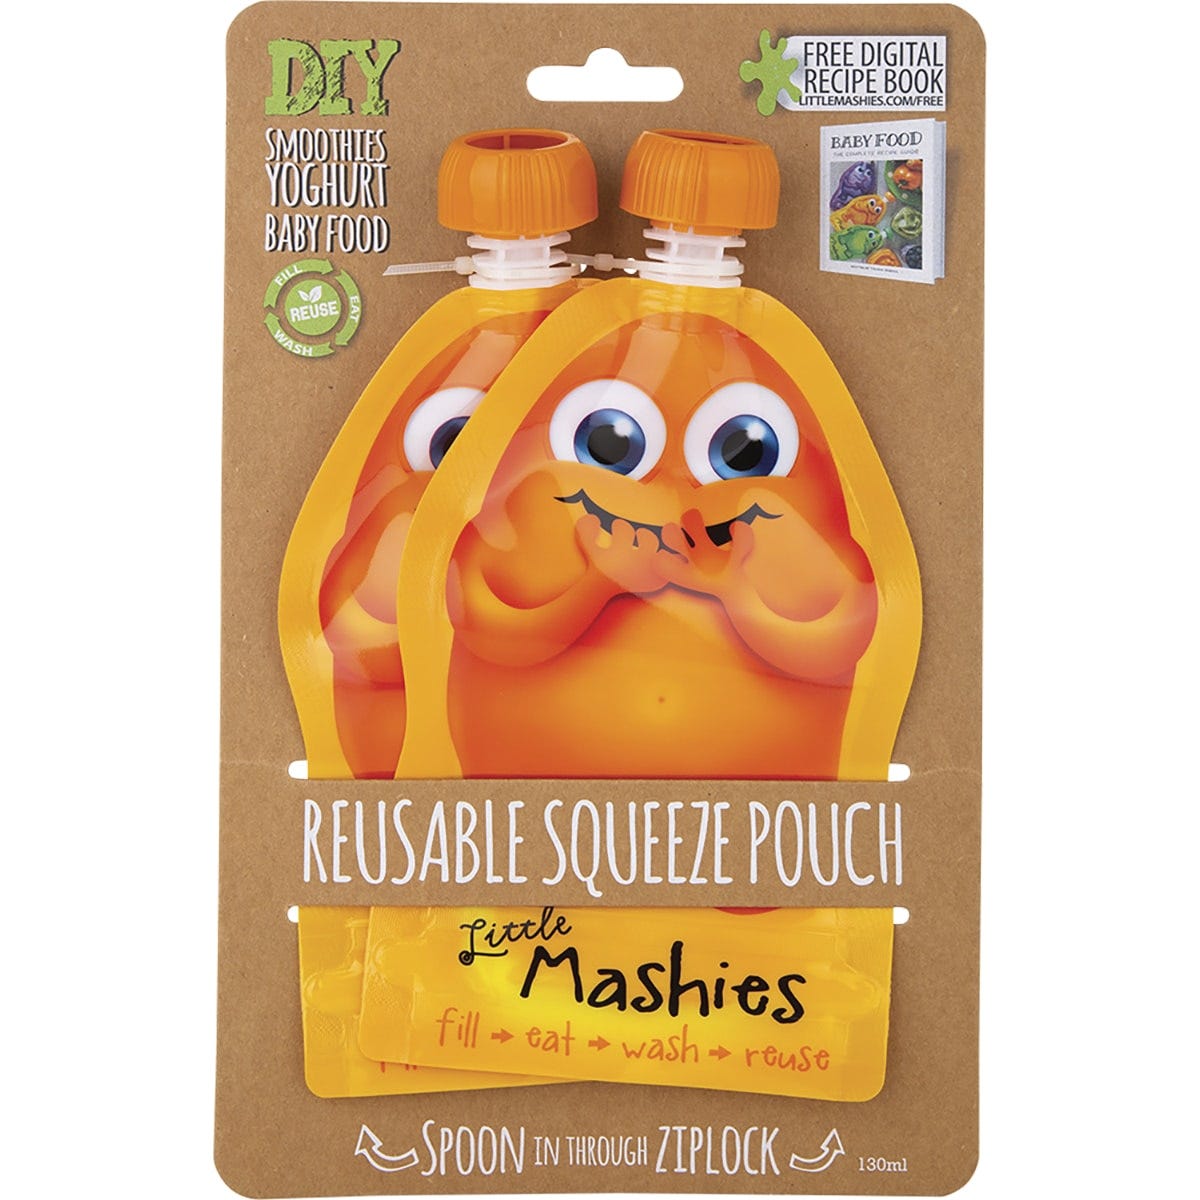 Little Mashies Reusable Squeeze Pouch Orange 2x130ml - Dr Earth - Food Storage, Baby & Kids